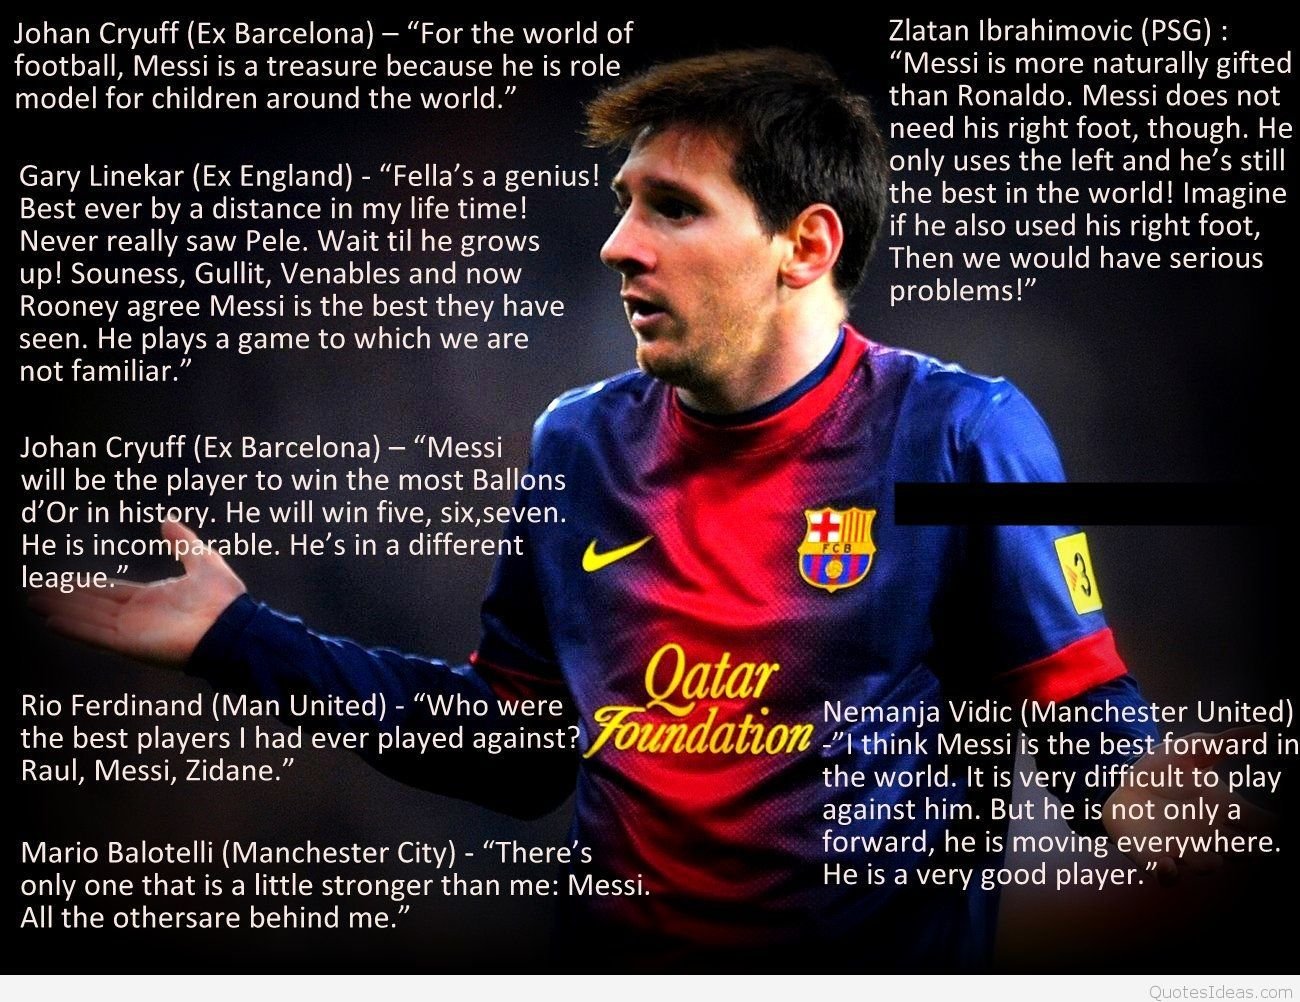 Best Lionel Messi Quotes, Wallpaper and sayings image